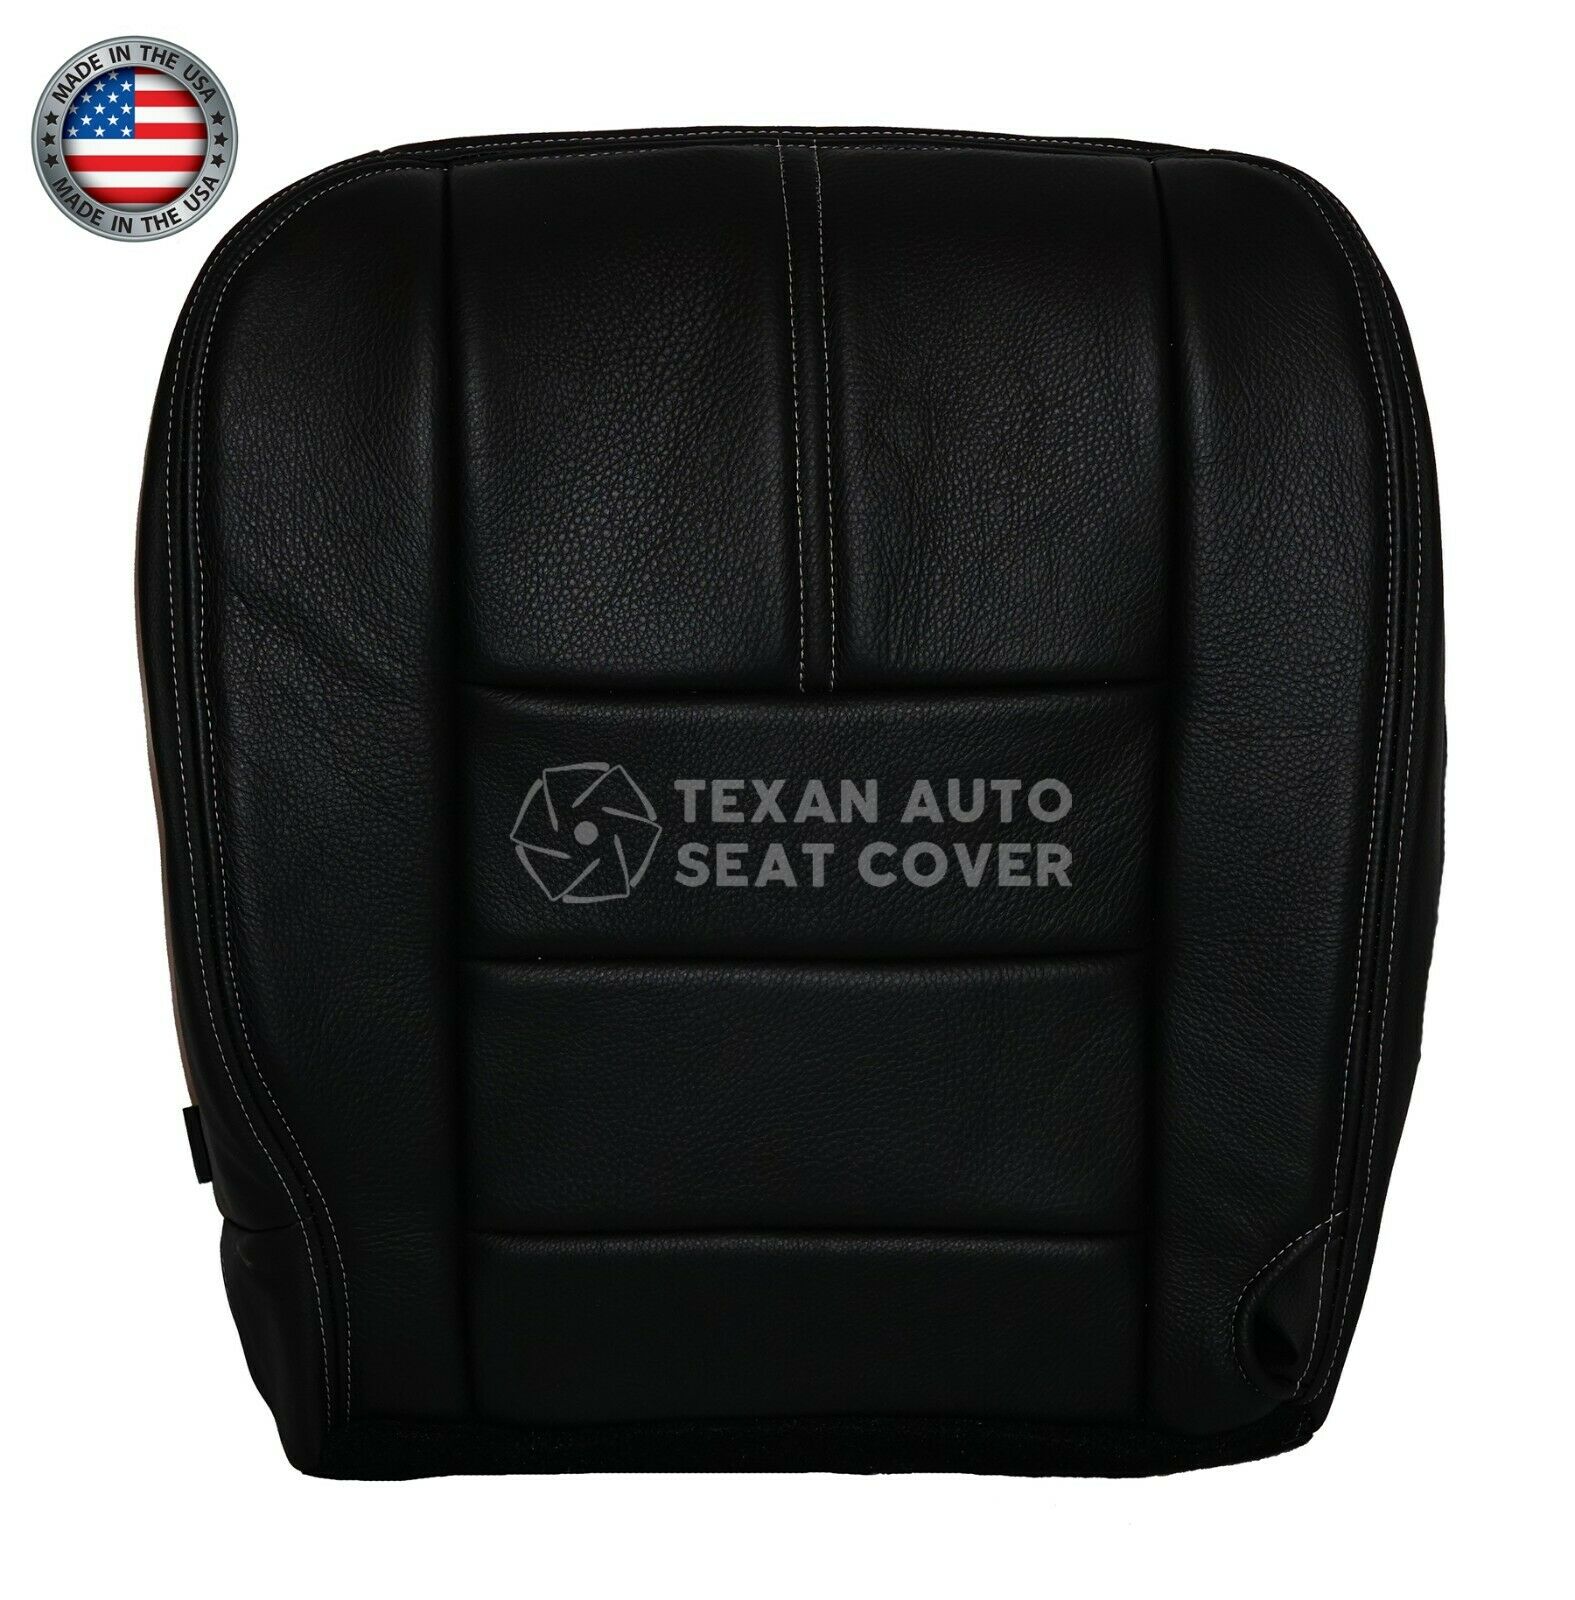 2008, 2009, 2010 Ford F250 F350 F450 F550 Passenger Bottom Replacement Leather Seat Cover Black